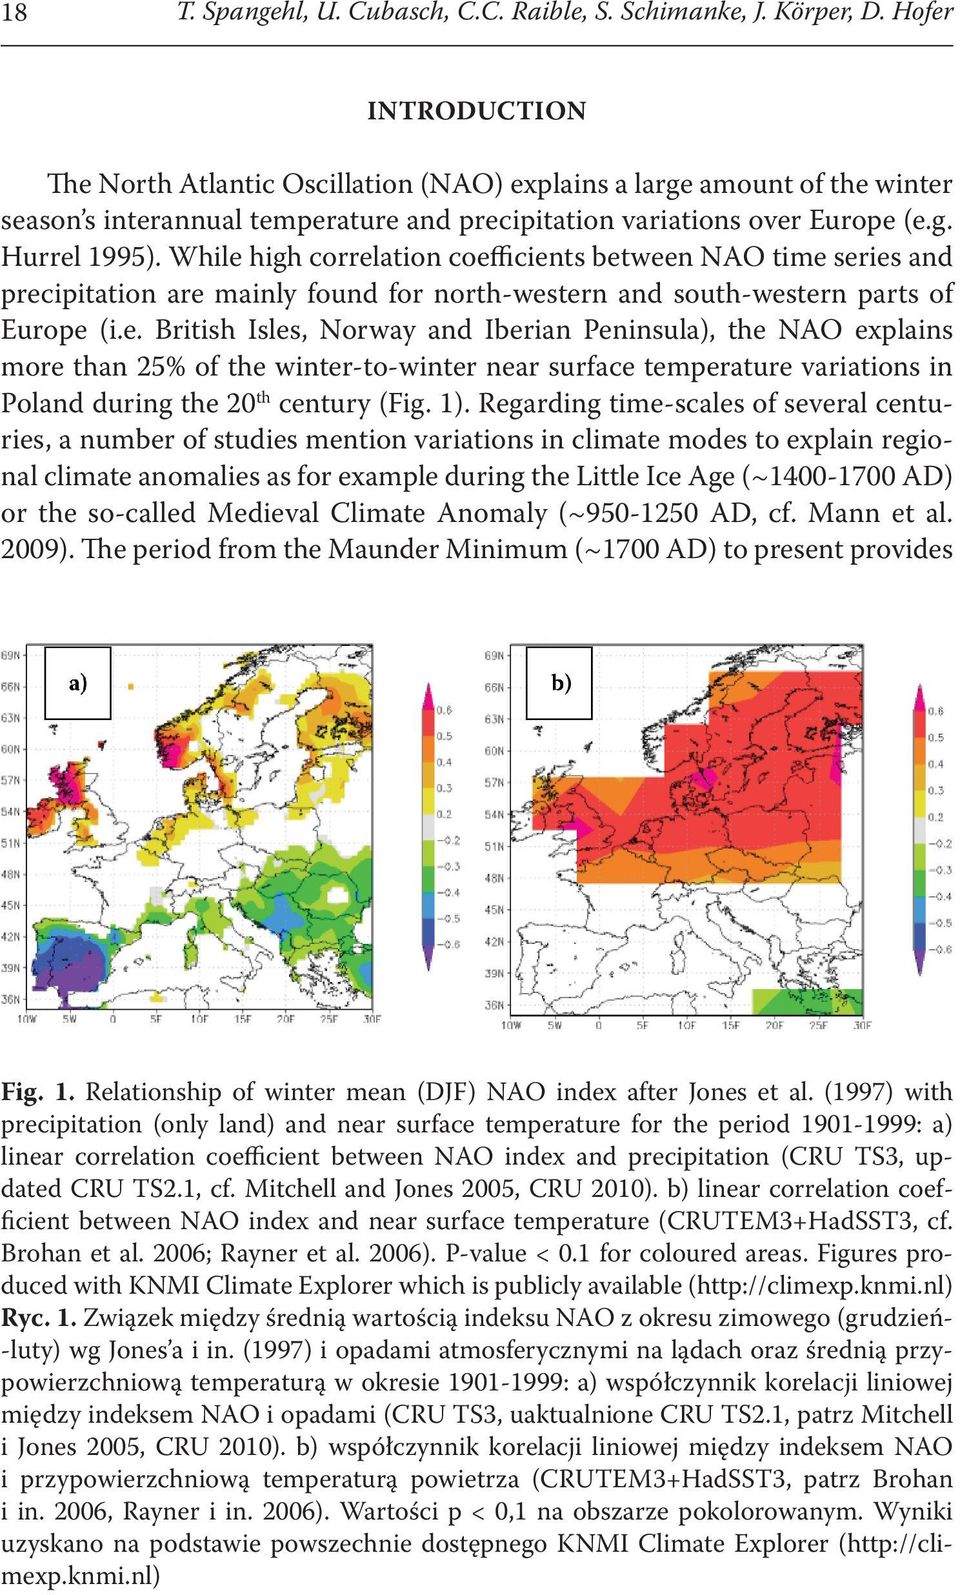 While high correlation coefficients between NAO time series and precipitation are mainly found for north-western and south-western parts of Europe (i.e. British Isles, Norway and Iberian Peninsula), the NAO explains more than 25% of the winter-to-winter near surface temperature variations in Poland during the 20 th century (Fig.